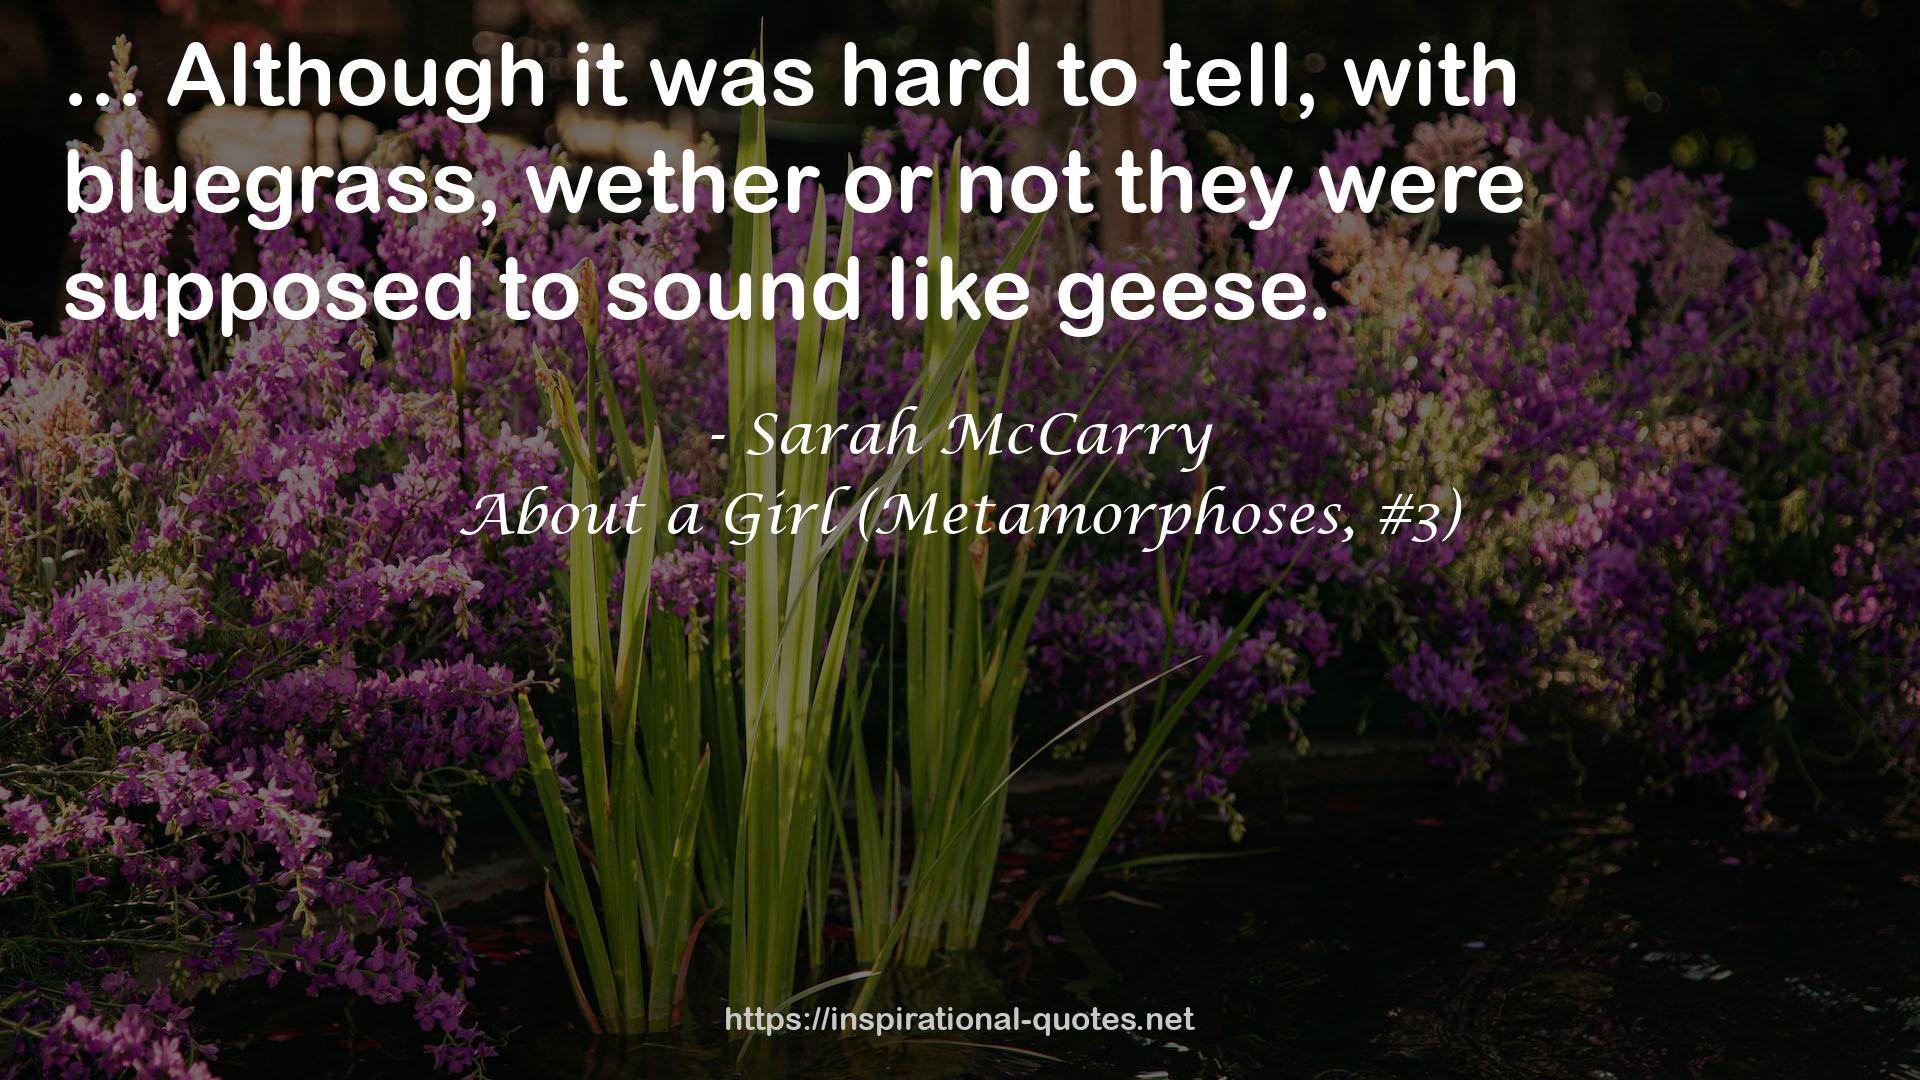 About a Girl (Metamorphoses, #3) QUOTES